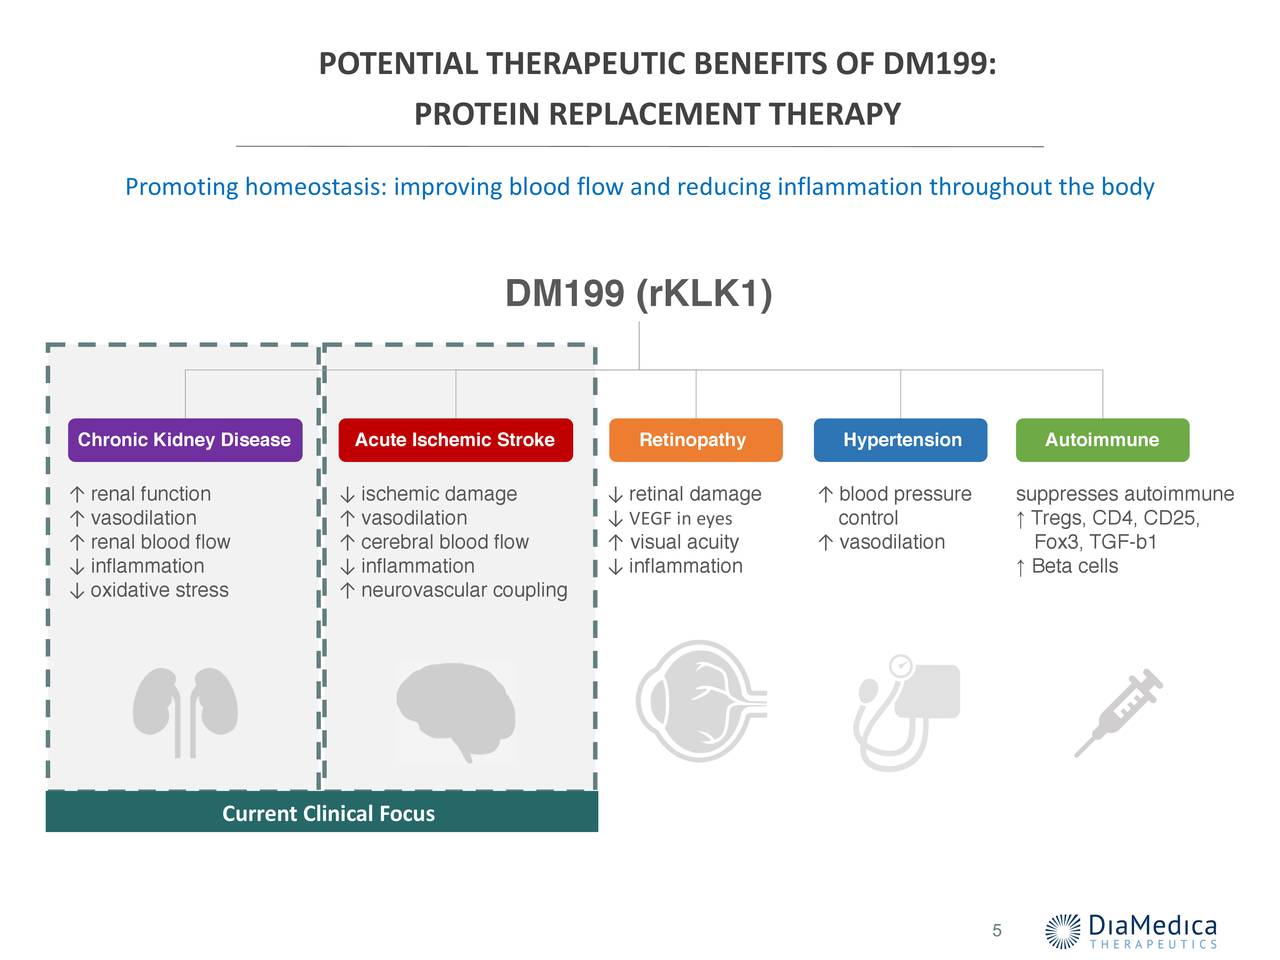 POTENTIAL THERAPEUTIC BENEFITS OF DM199: